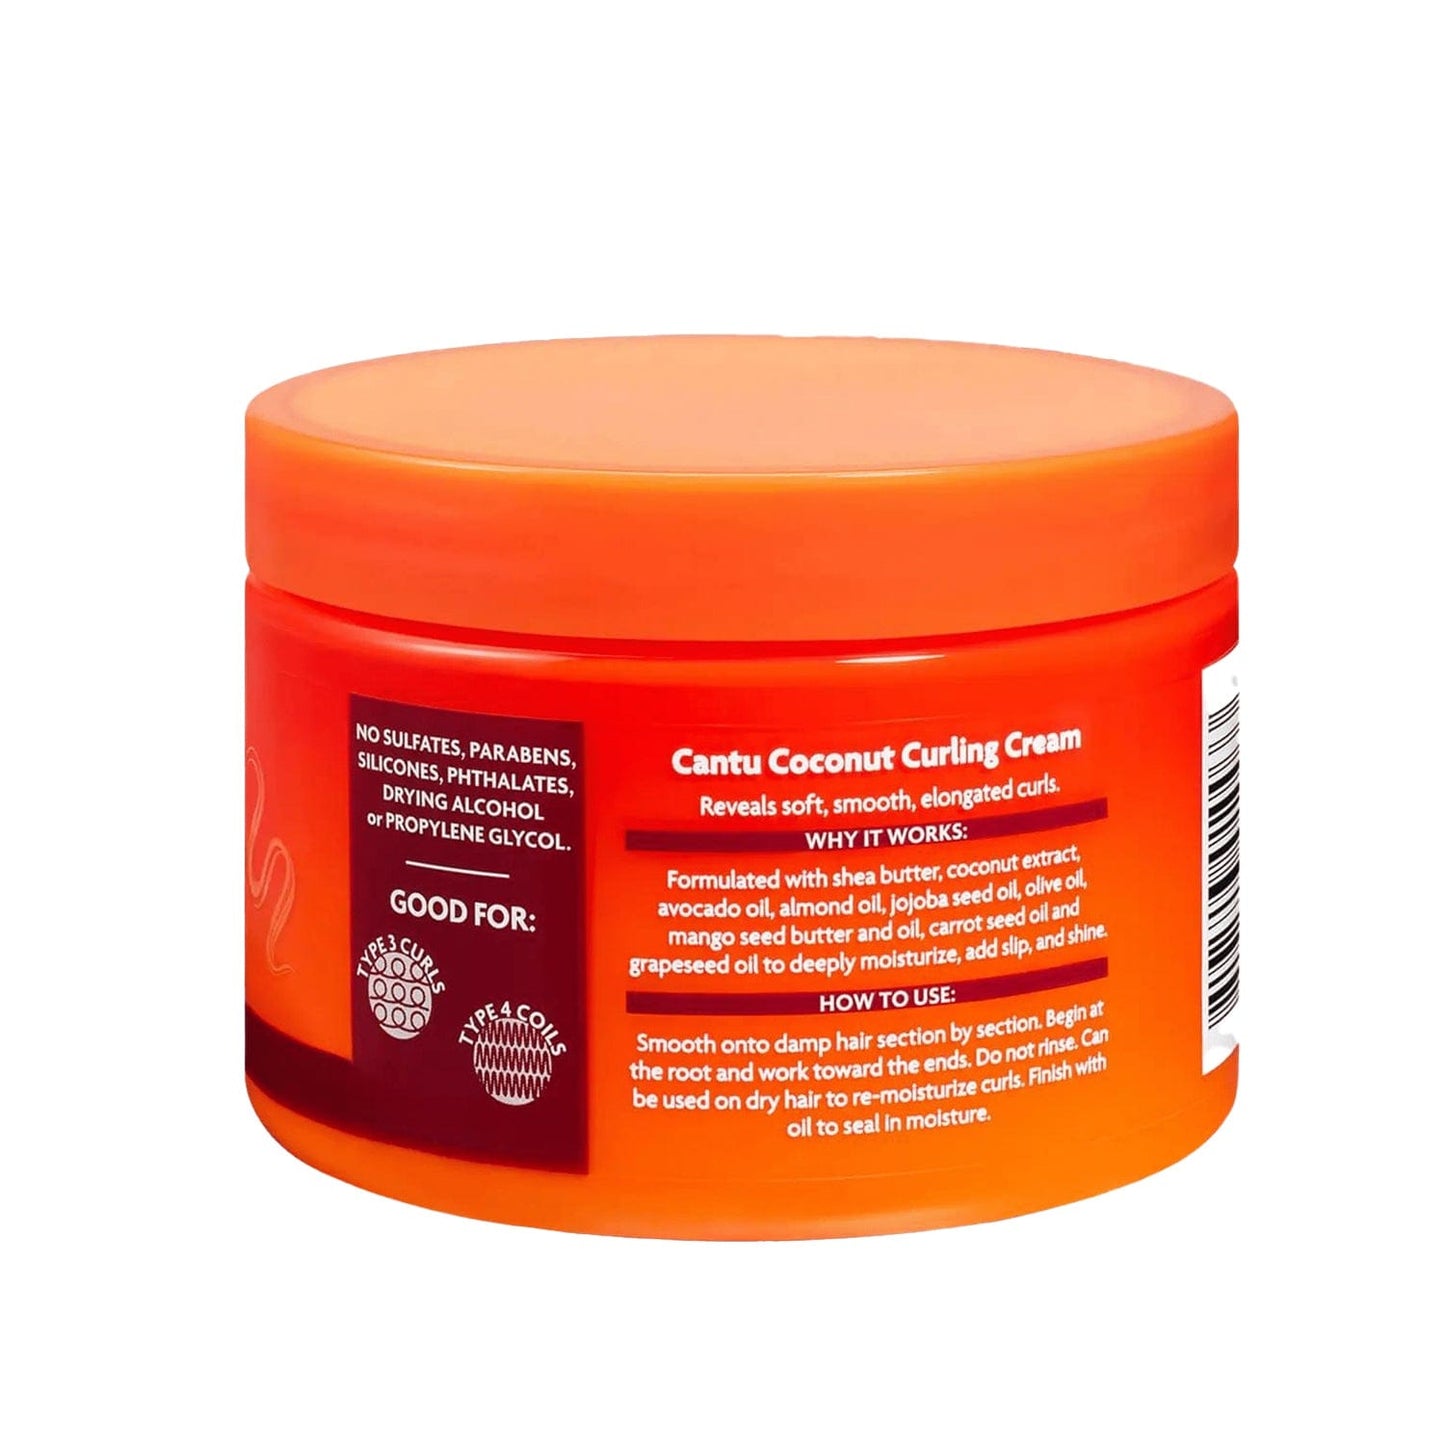 Cantu - Shea Butter - Crème boucles coco "curling" - 340g (new packaging) - Cantu - Ethni Beauty Market